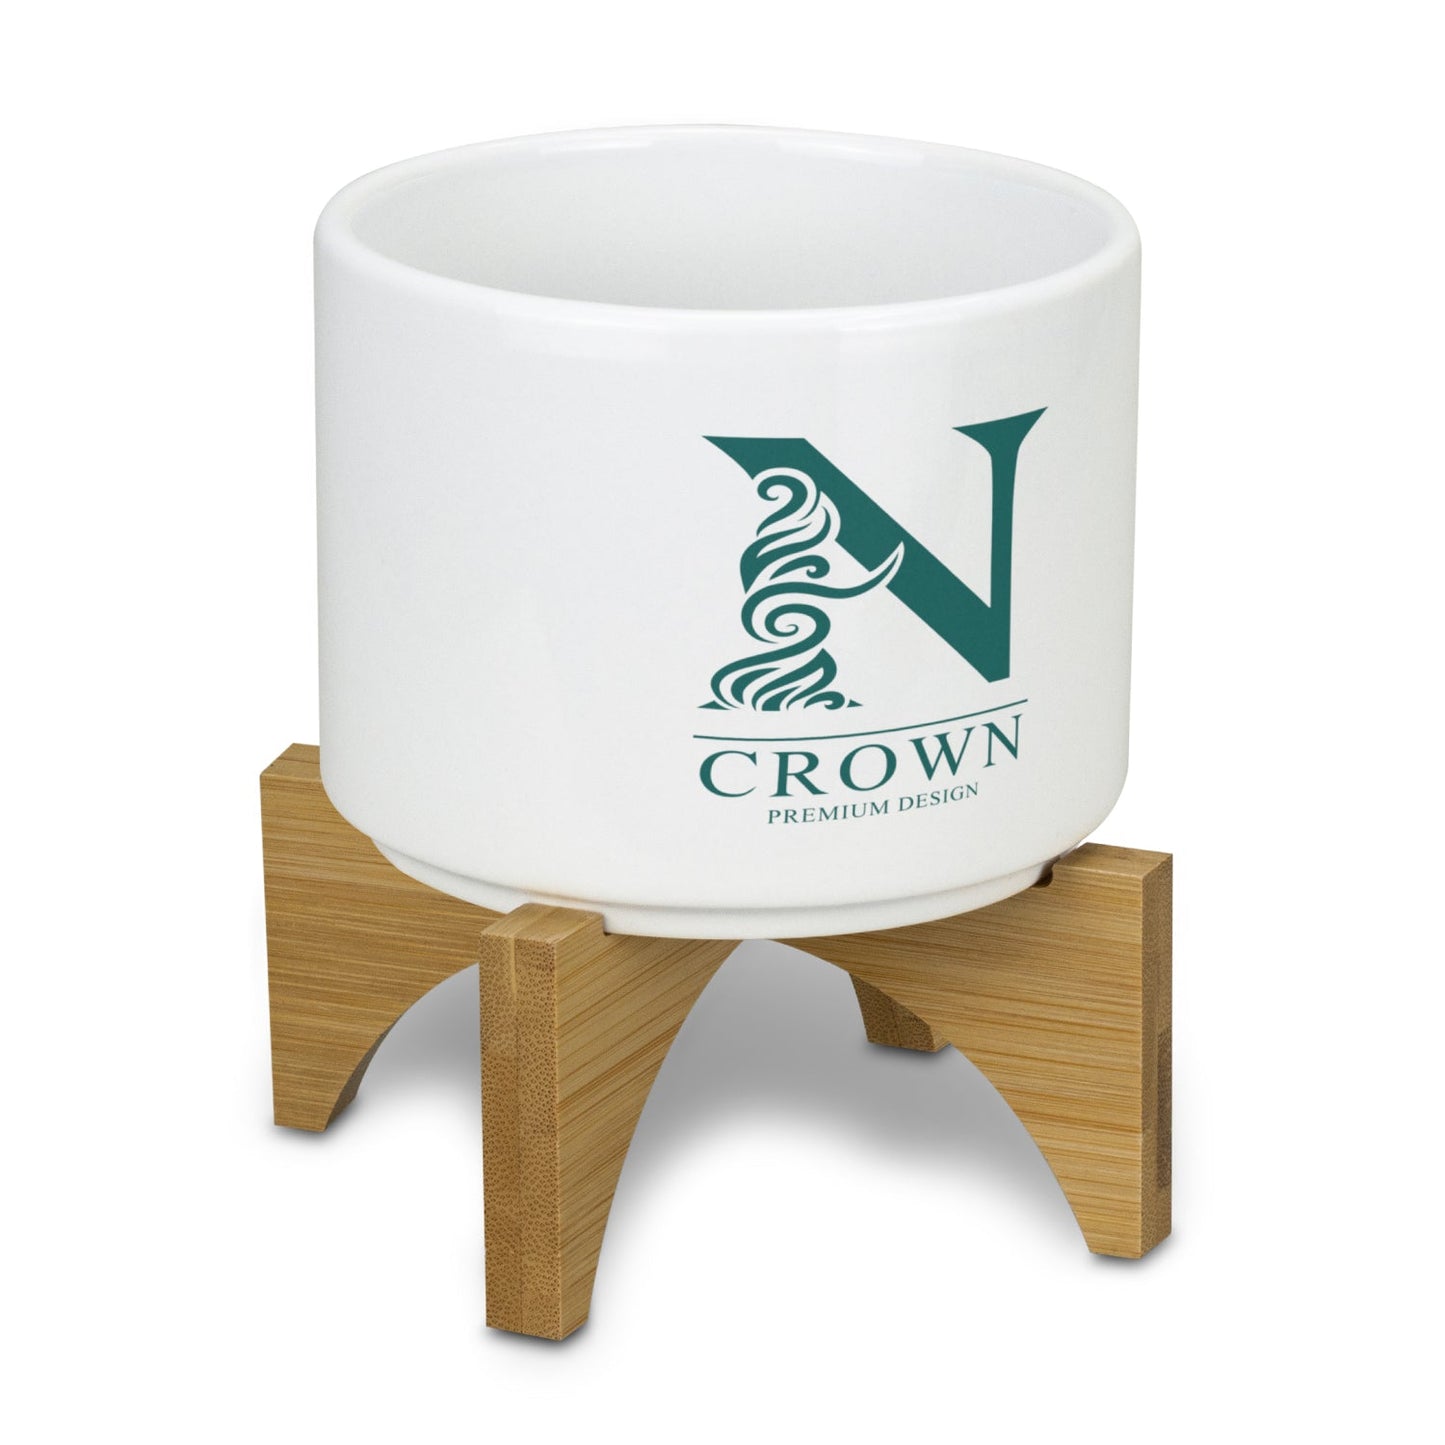 Planter with Bamboo Base- Price Includes printed logo